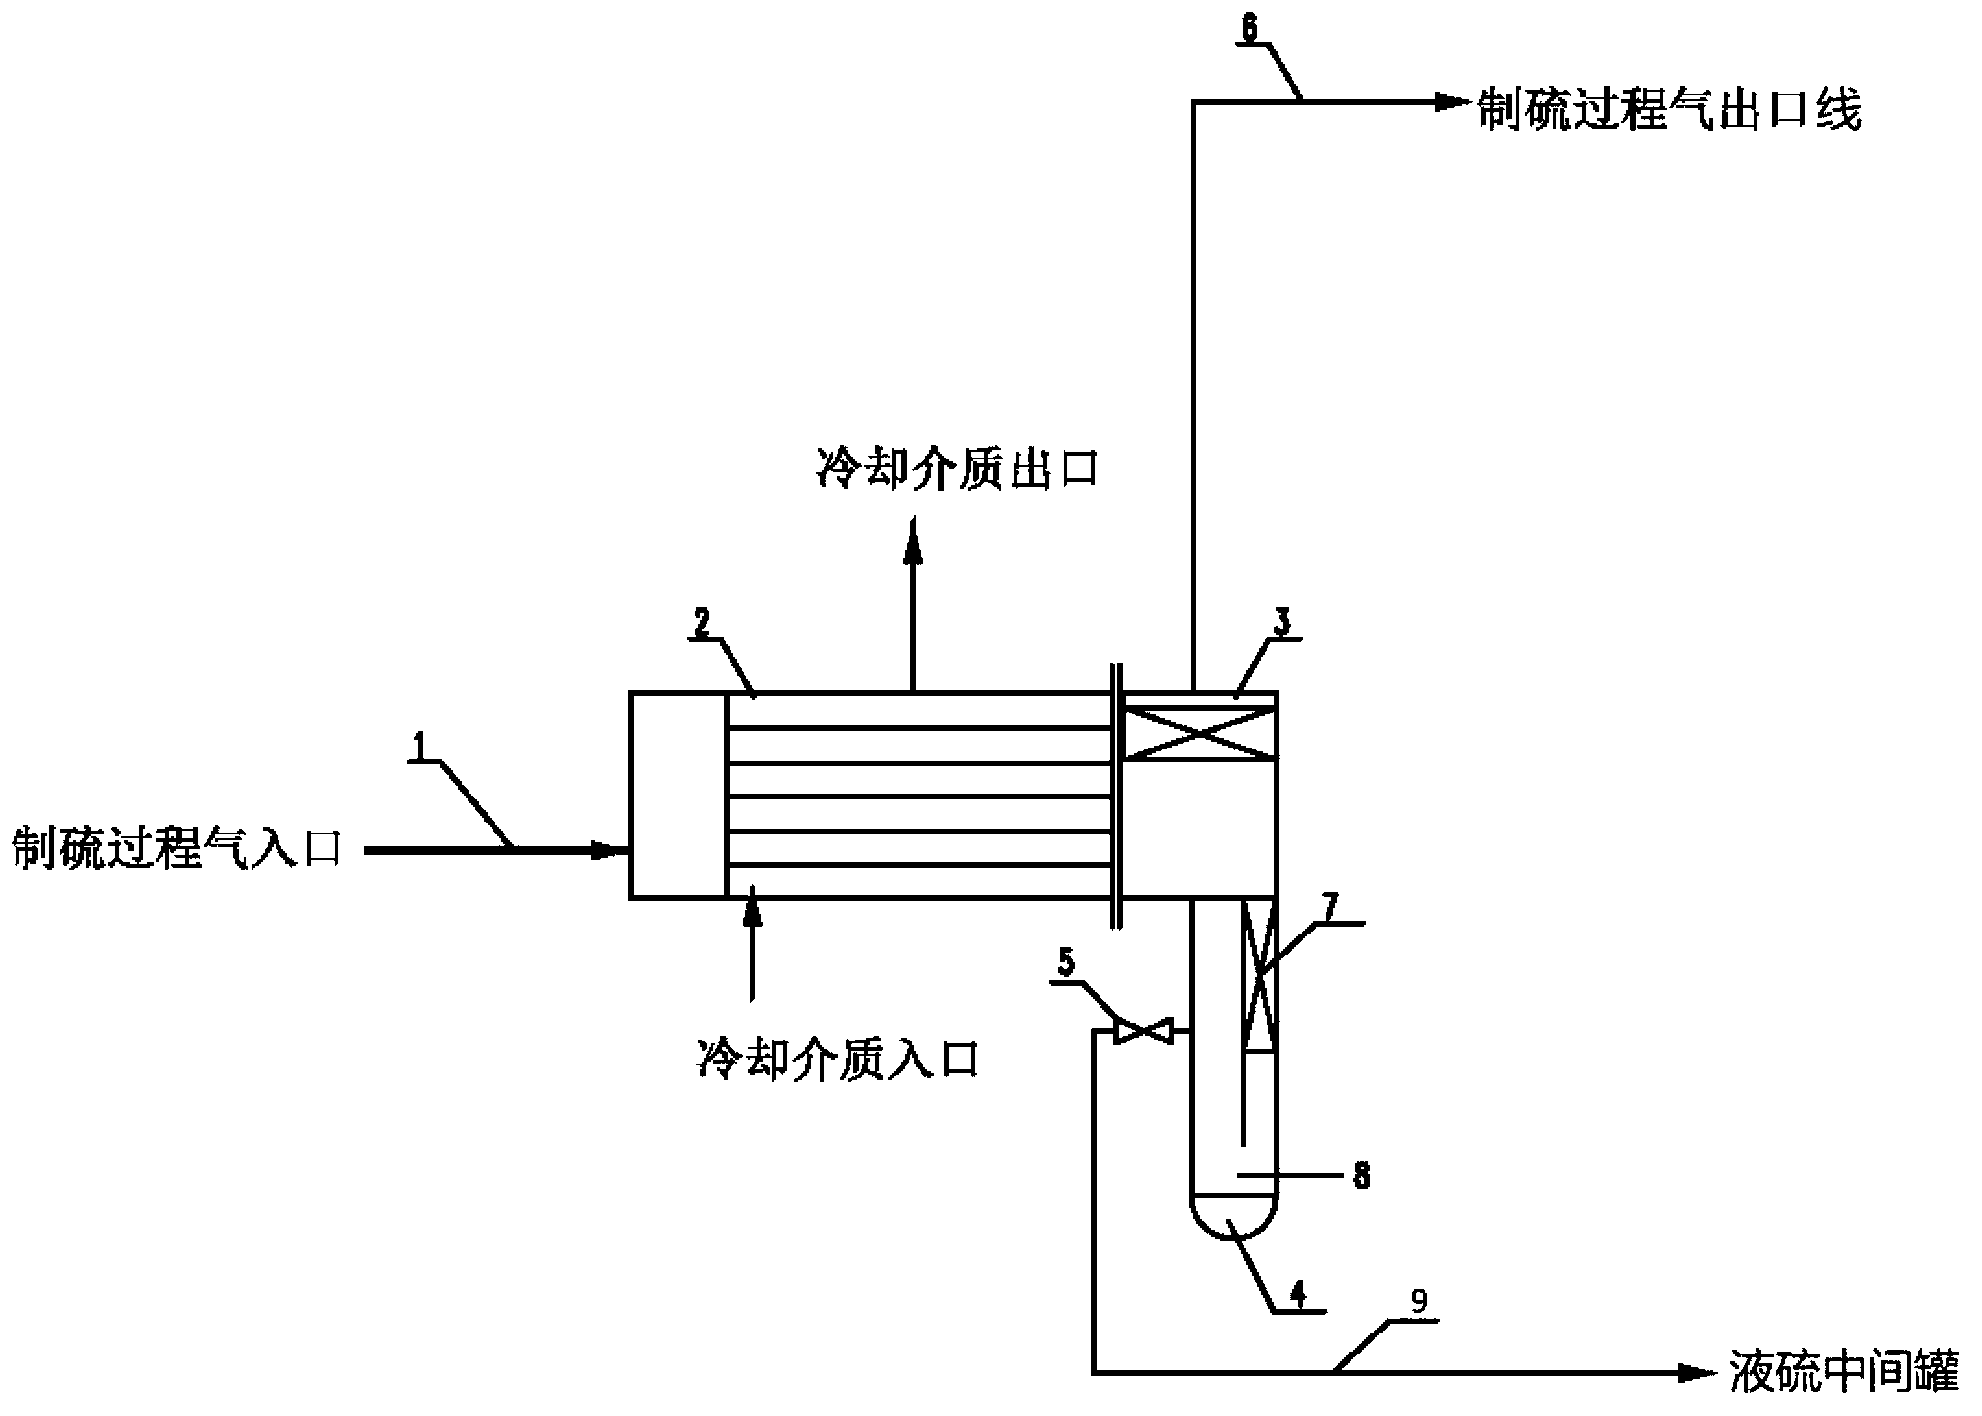 Sulphur condensing and separating deice of sulphur recovering device